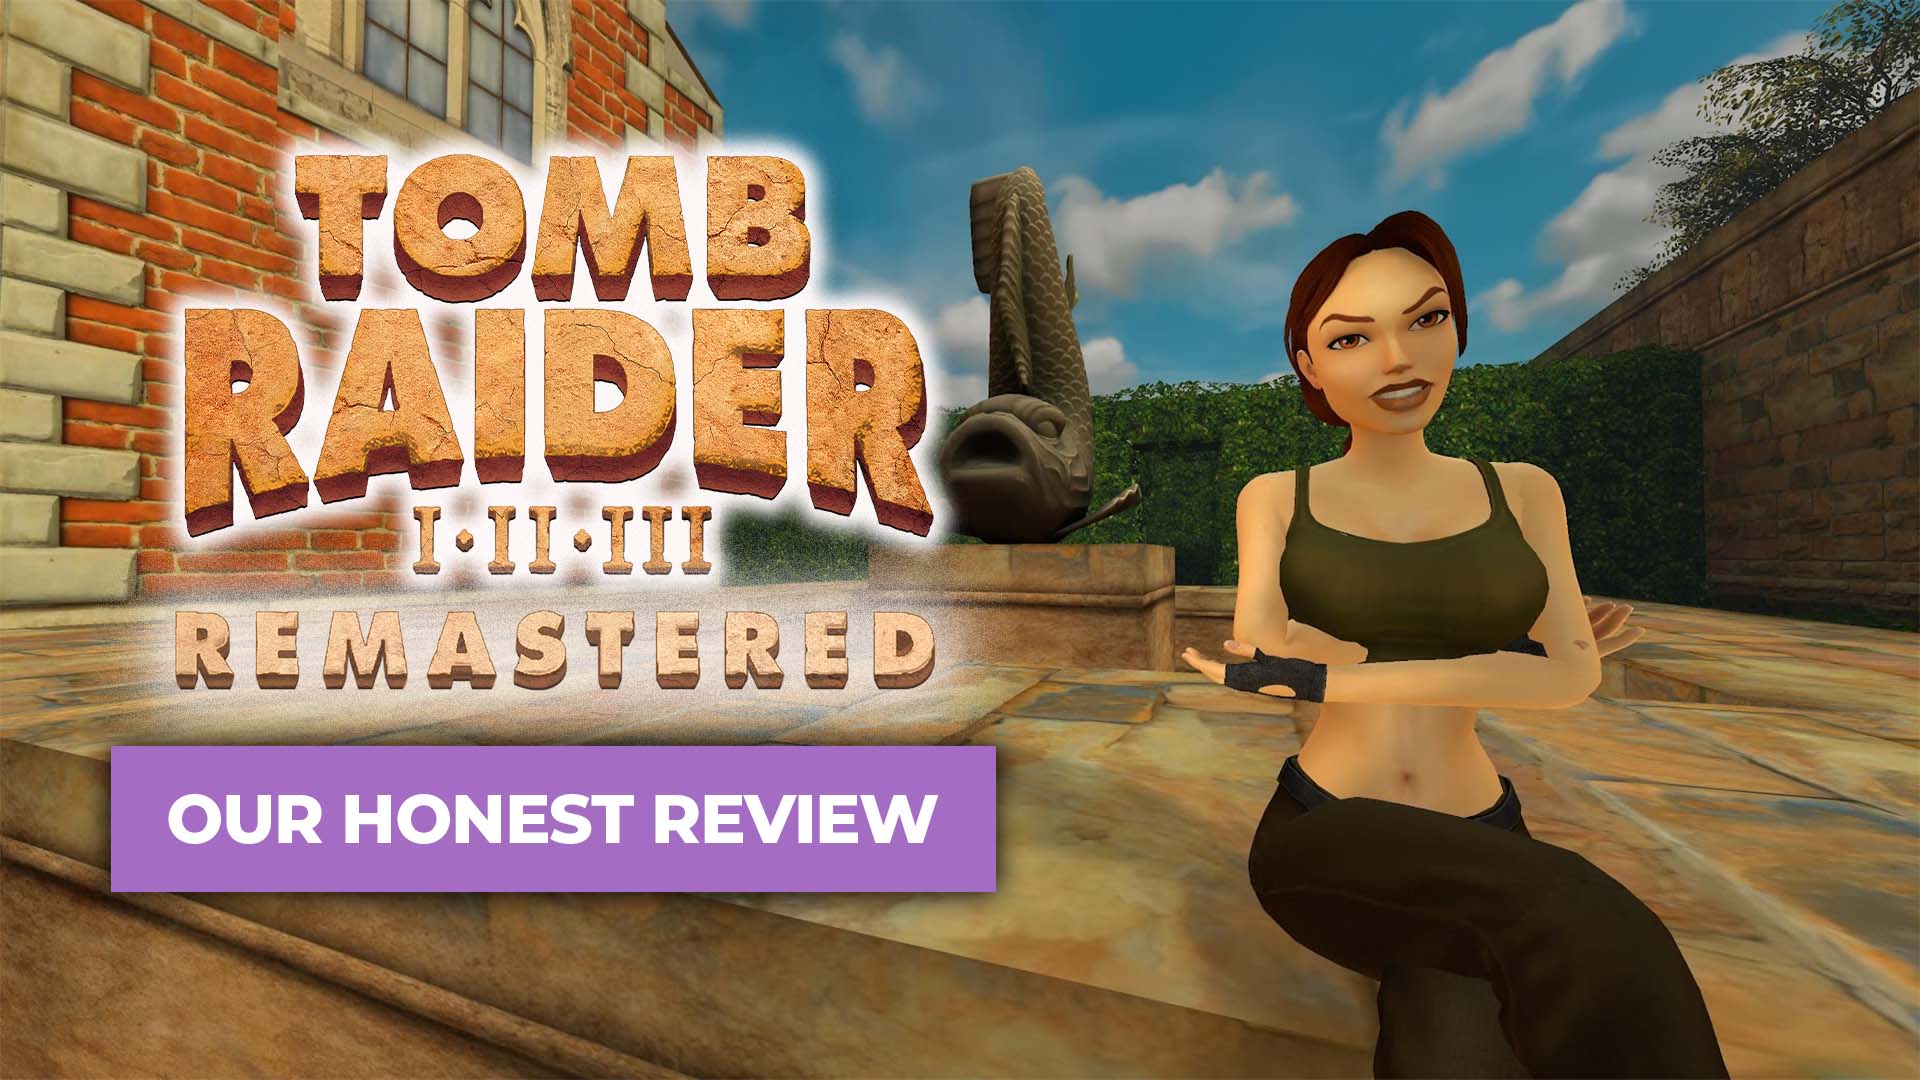 Tomb Raider I-III Remastered from Aspyr - for real this time